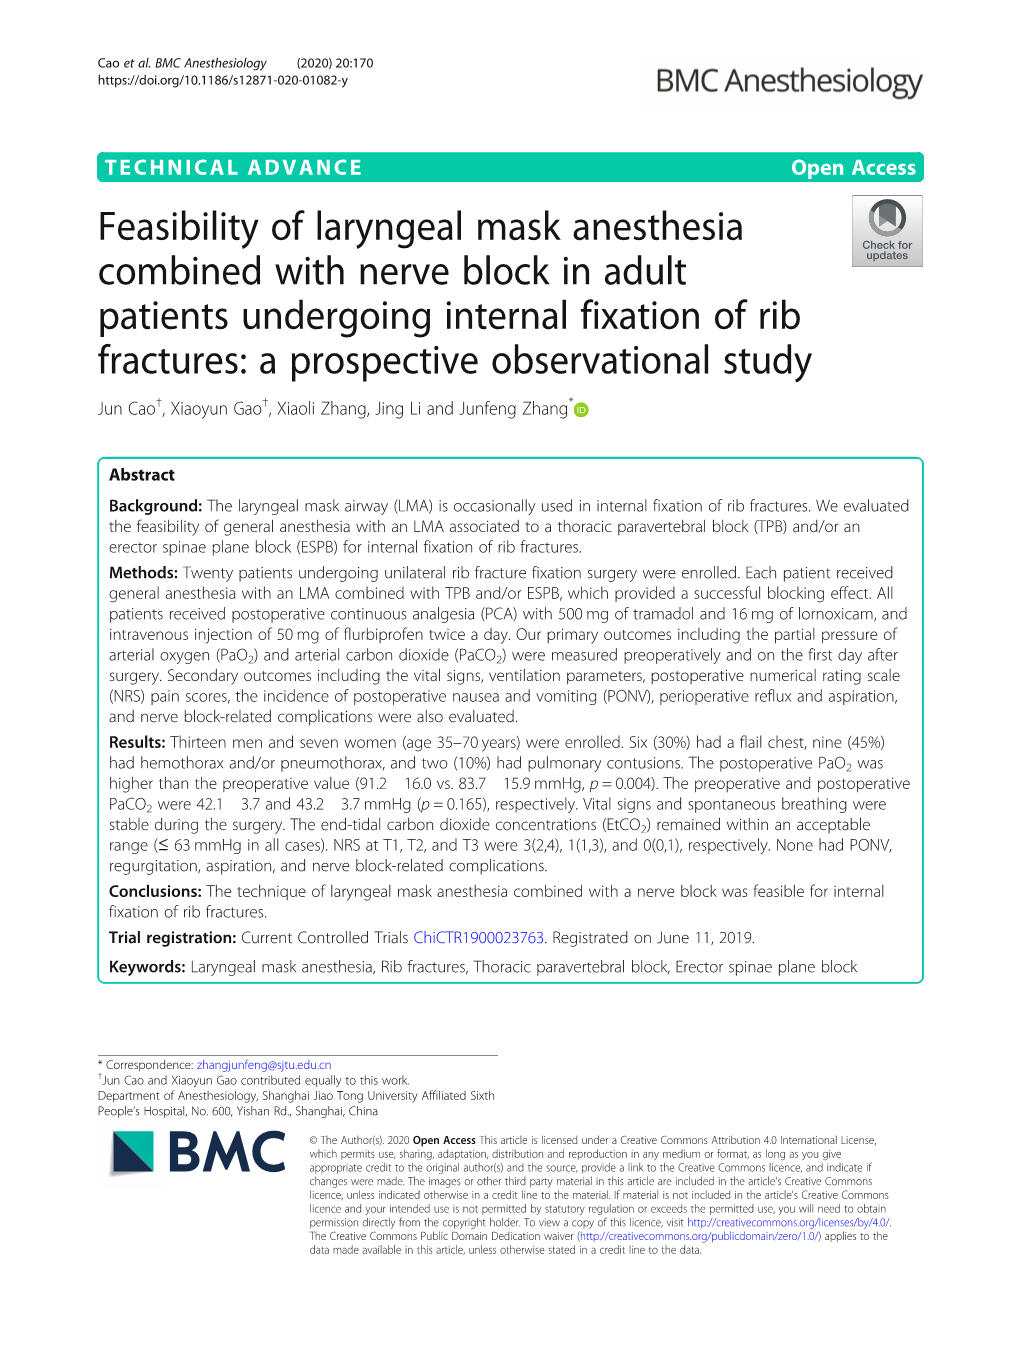 Feasibility of Laryngeal Mask Anesthesia Combined with Nerve